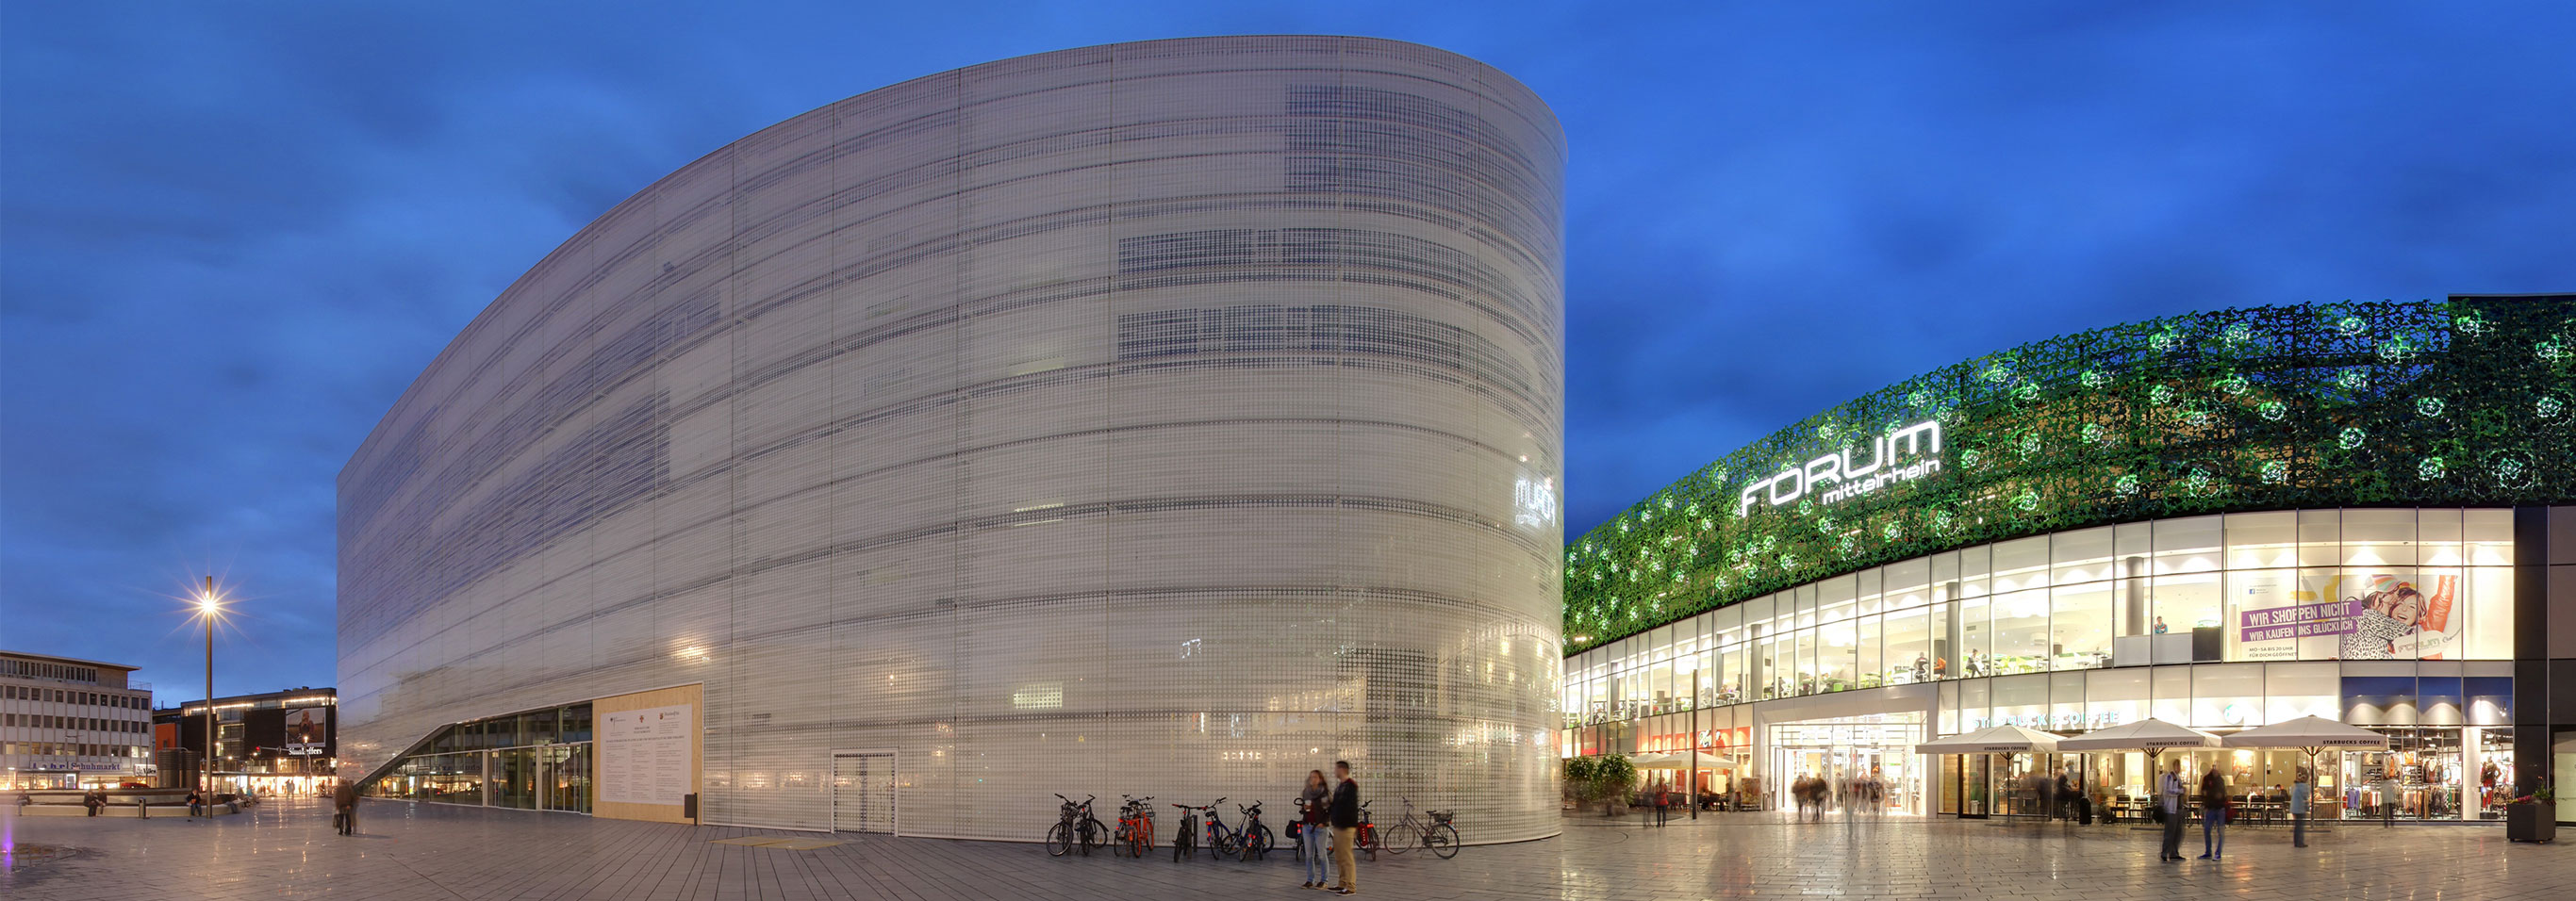 Façade specialist seele manufactured 8,670sqm façade area for the forum Mittelrhein in Koblenz, which consists of extensive retail and cultural facilities.